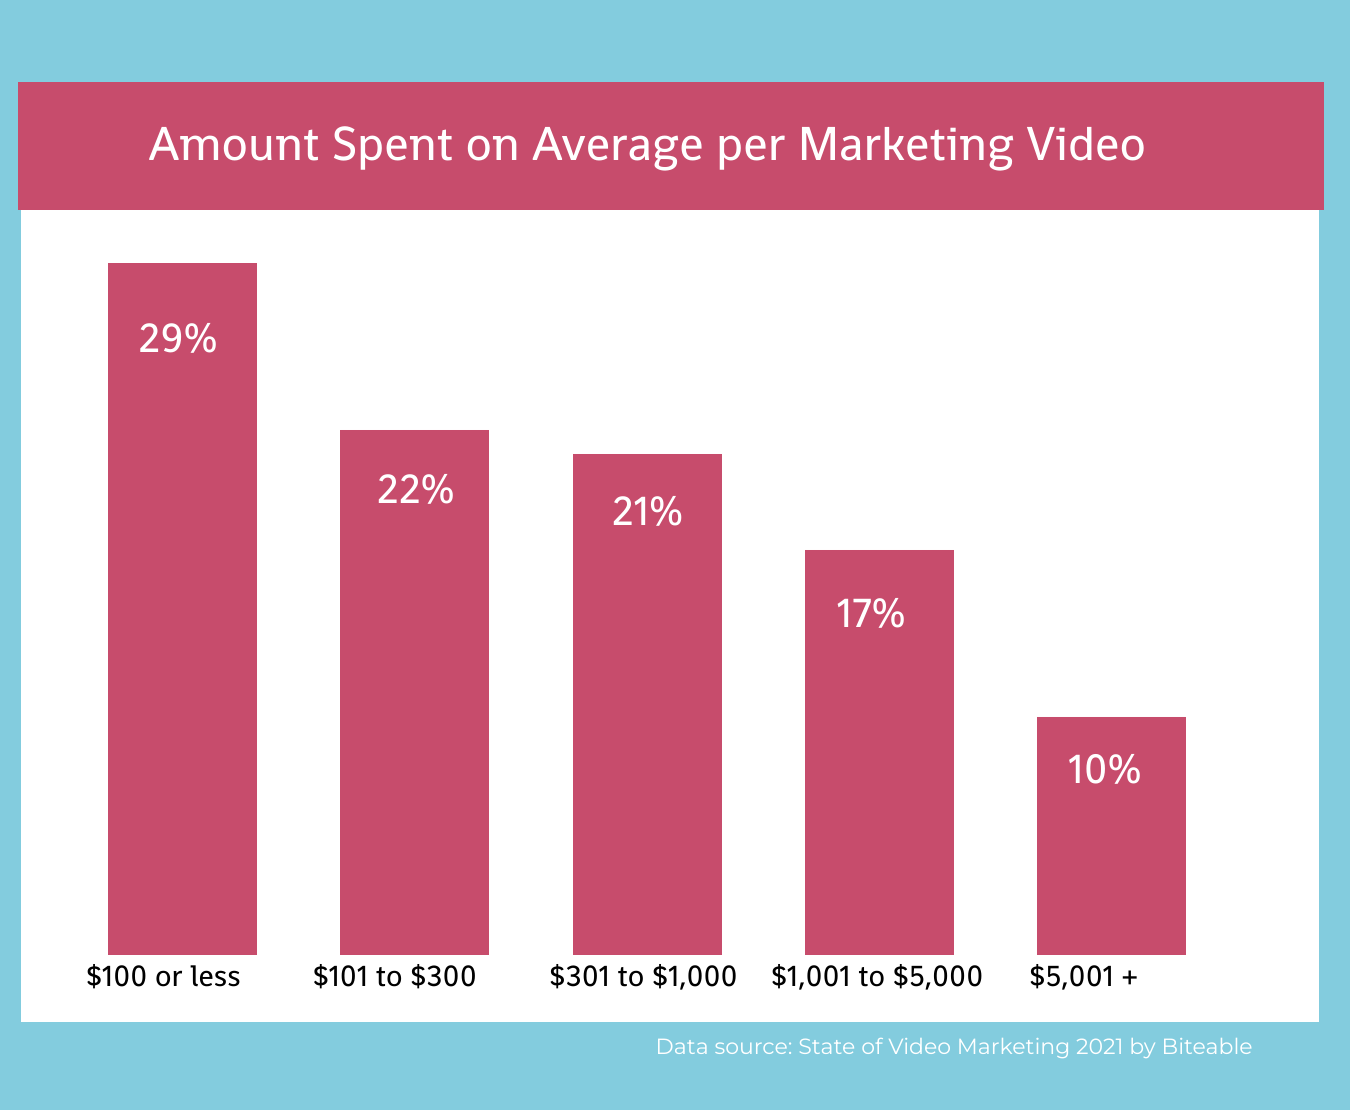 Benefits of YouTube for B2B Marketing include the high ROI resulting in part from lower costs to produce video content. Average amount spent per video in 2021 as less than $100 for 29%; $101 to $300 by 22%; $301 to $1,000 by 21%; $1,001 to $5000 by 17%; and more than $5K by 10%, as reported by Biteable was